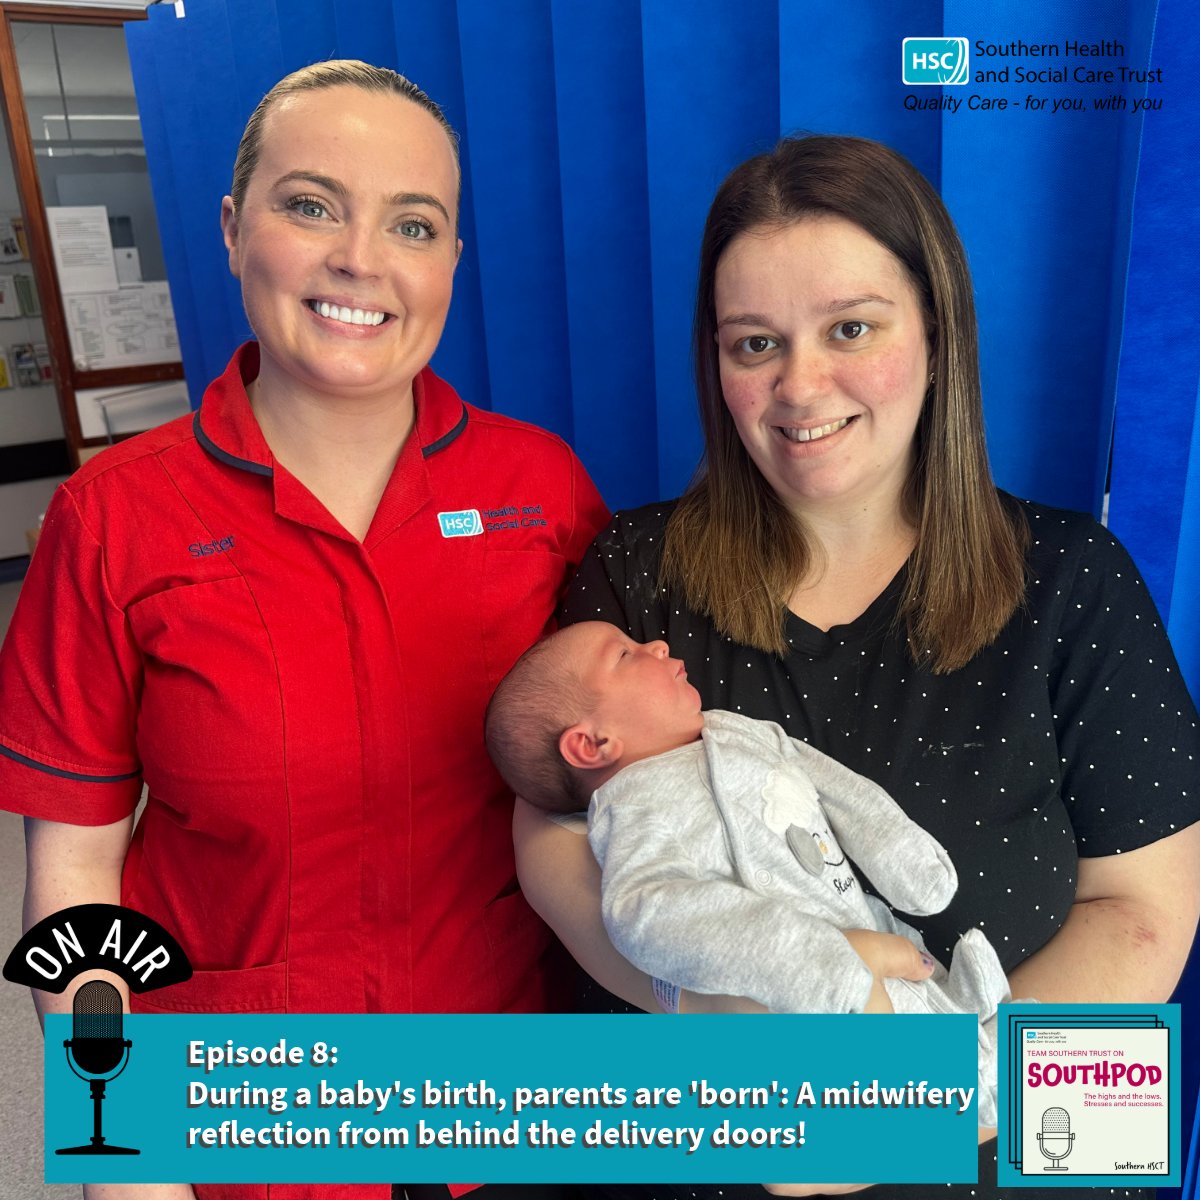 From bumps to babies, breastmilk to baby poo - our midwives see it all.
As part of our podcast, we caught up with midwife Sinead Campbell to hear what it is like to witness that magical transition for many from adult to parent.
pulse.ly/99dbtrukwa 🎙️
#TeamSHSCT #IDM2024